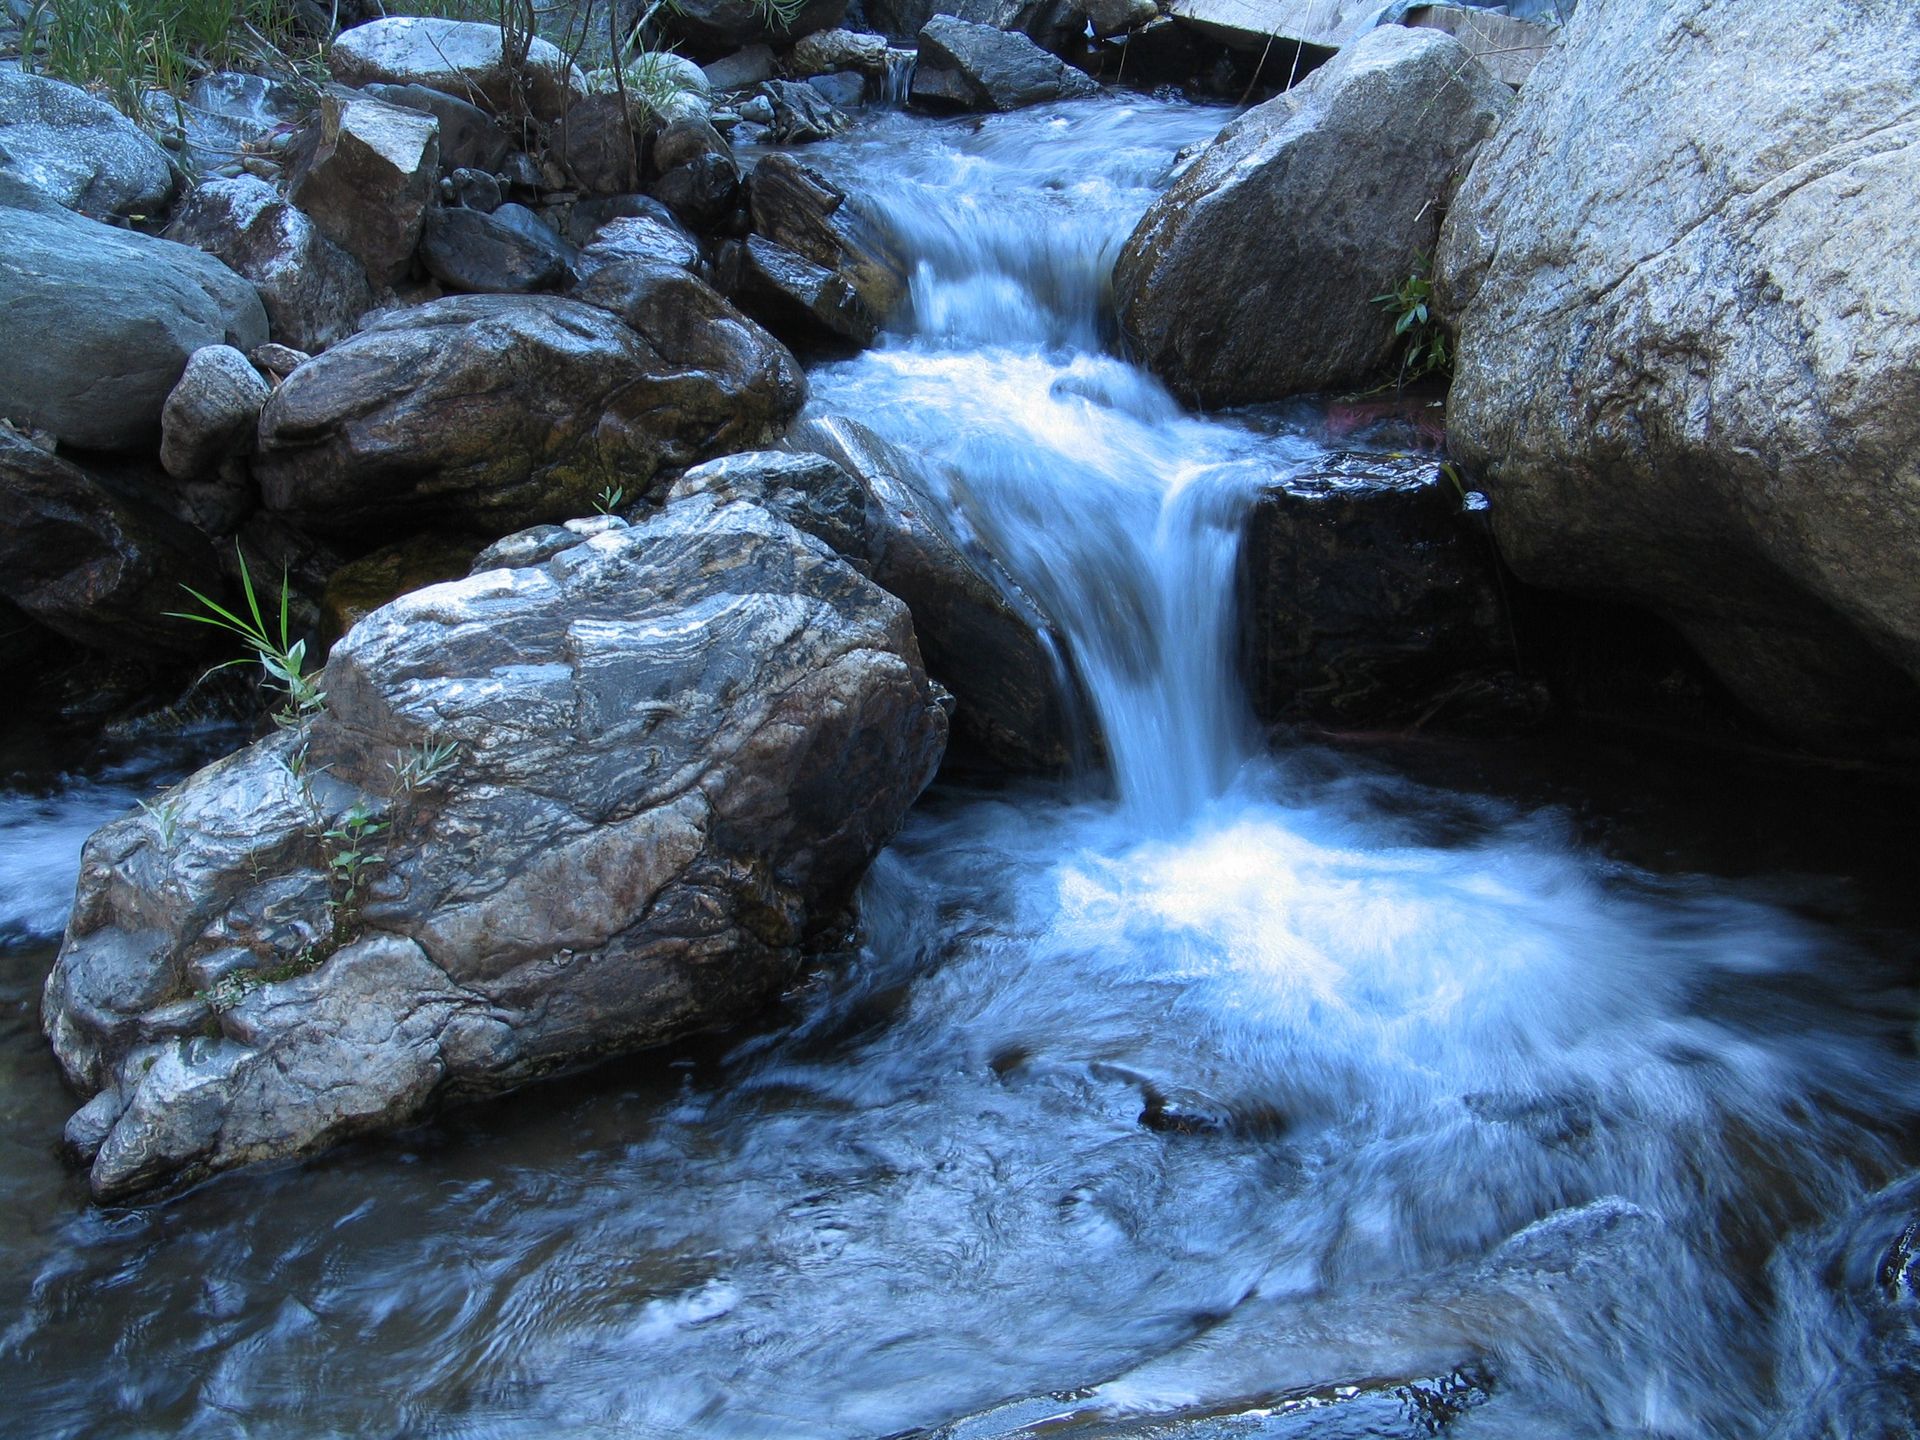 Water flowing down in a stream.